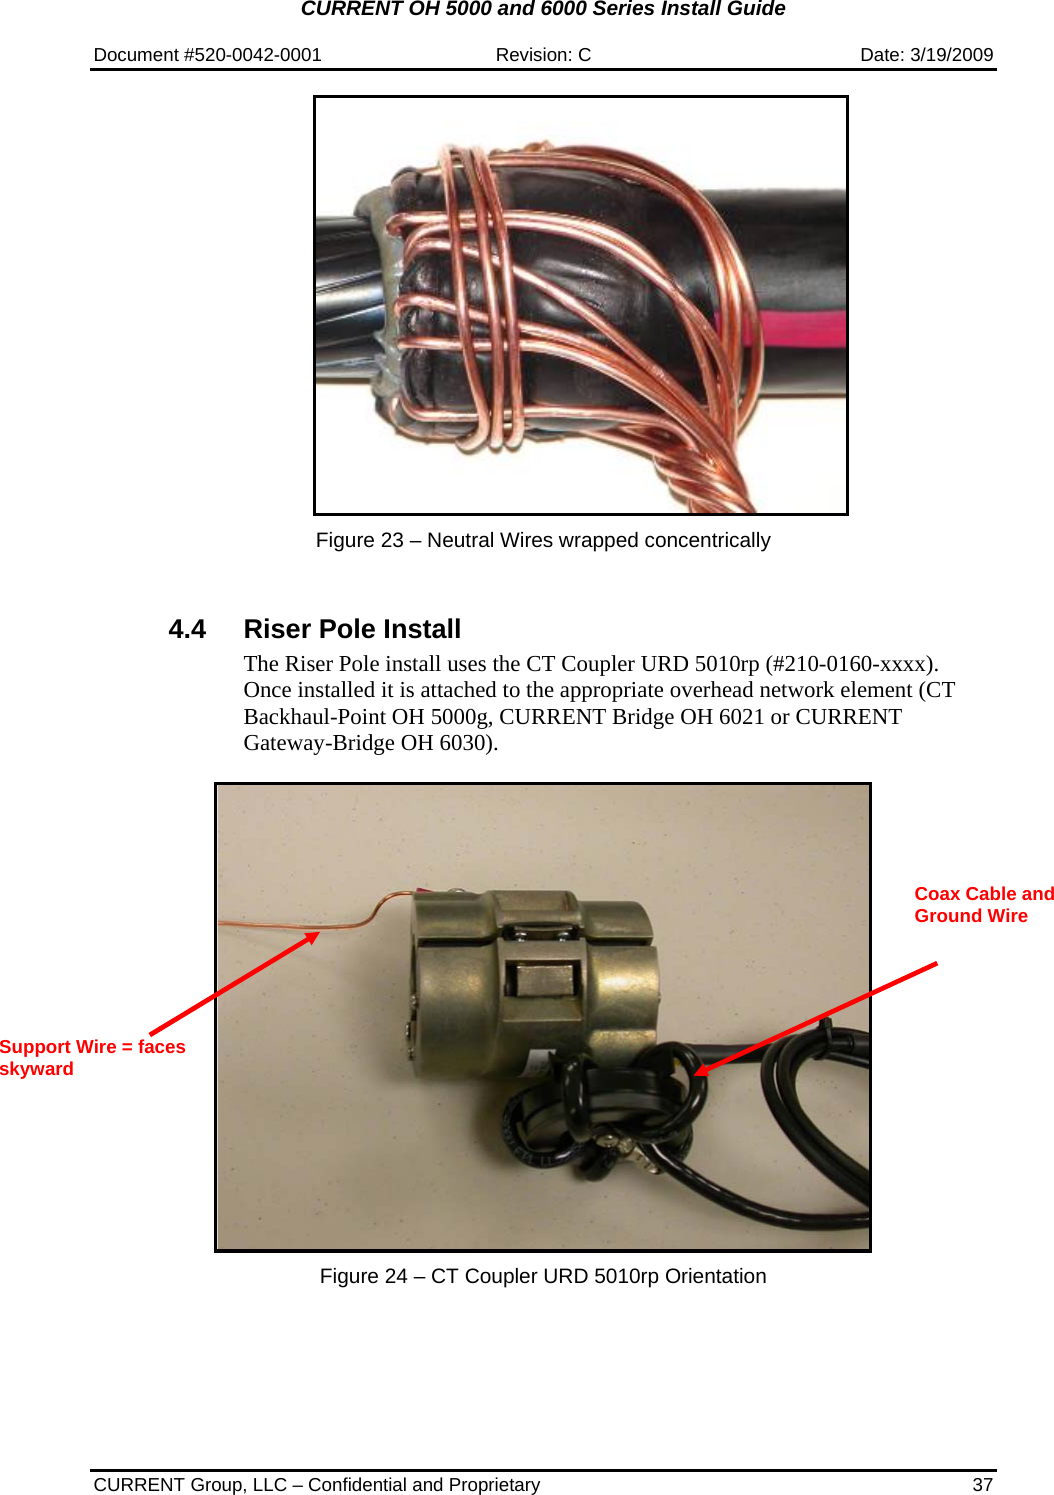 CURRENT OH 5000 and 6000 Series Install Guide  Document #520-0042-0001  Revision: C  Date: 3/19/2009  CURRENT Group, LLC – Confidential and Proprietary  37   Figure 23 – Neutral Wires wrapped concentrically    4.4  Riser Pole Install The Riser Pole install uses the CT Coupler URD 5010rp (#210-0160-xxxx).  Once installed it is attached to the appropriate overhead network element (CT Backhaul-Point OH 5000g, CURRENT Bridge OH 6021 or CURRENT Gateway-Bridge OH 6030).      Figure 24 – CT Coupler URD 5010rp Orientation   Support Wire = faces skyward Coax Cable and Ground Wire  